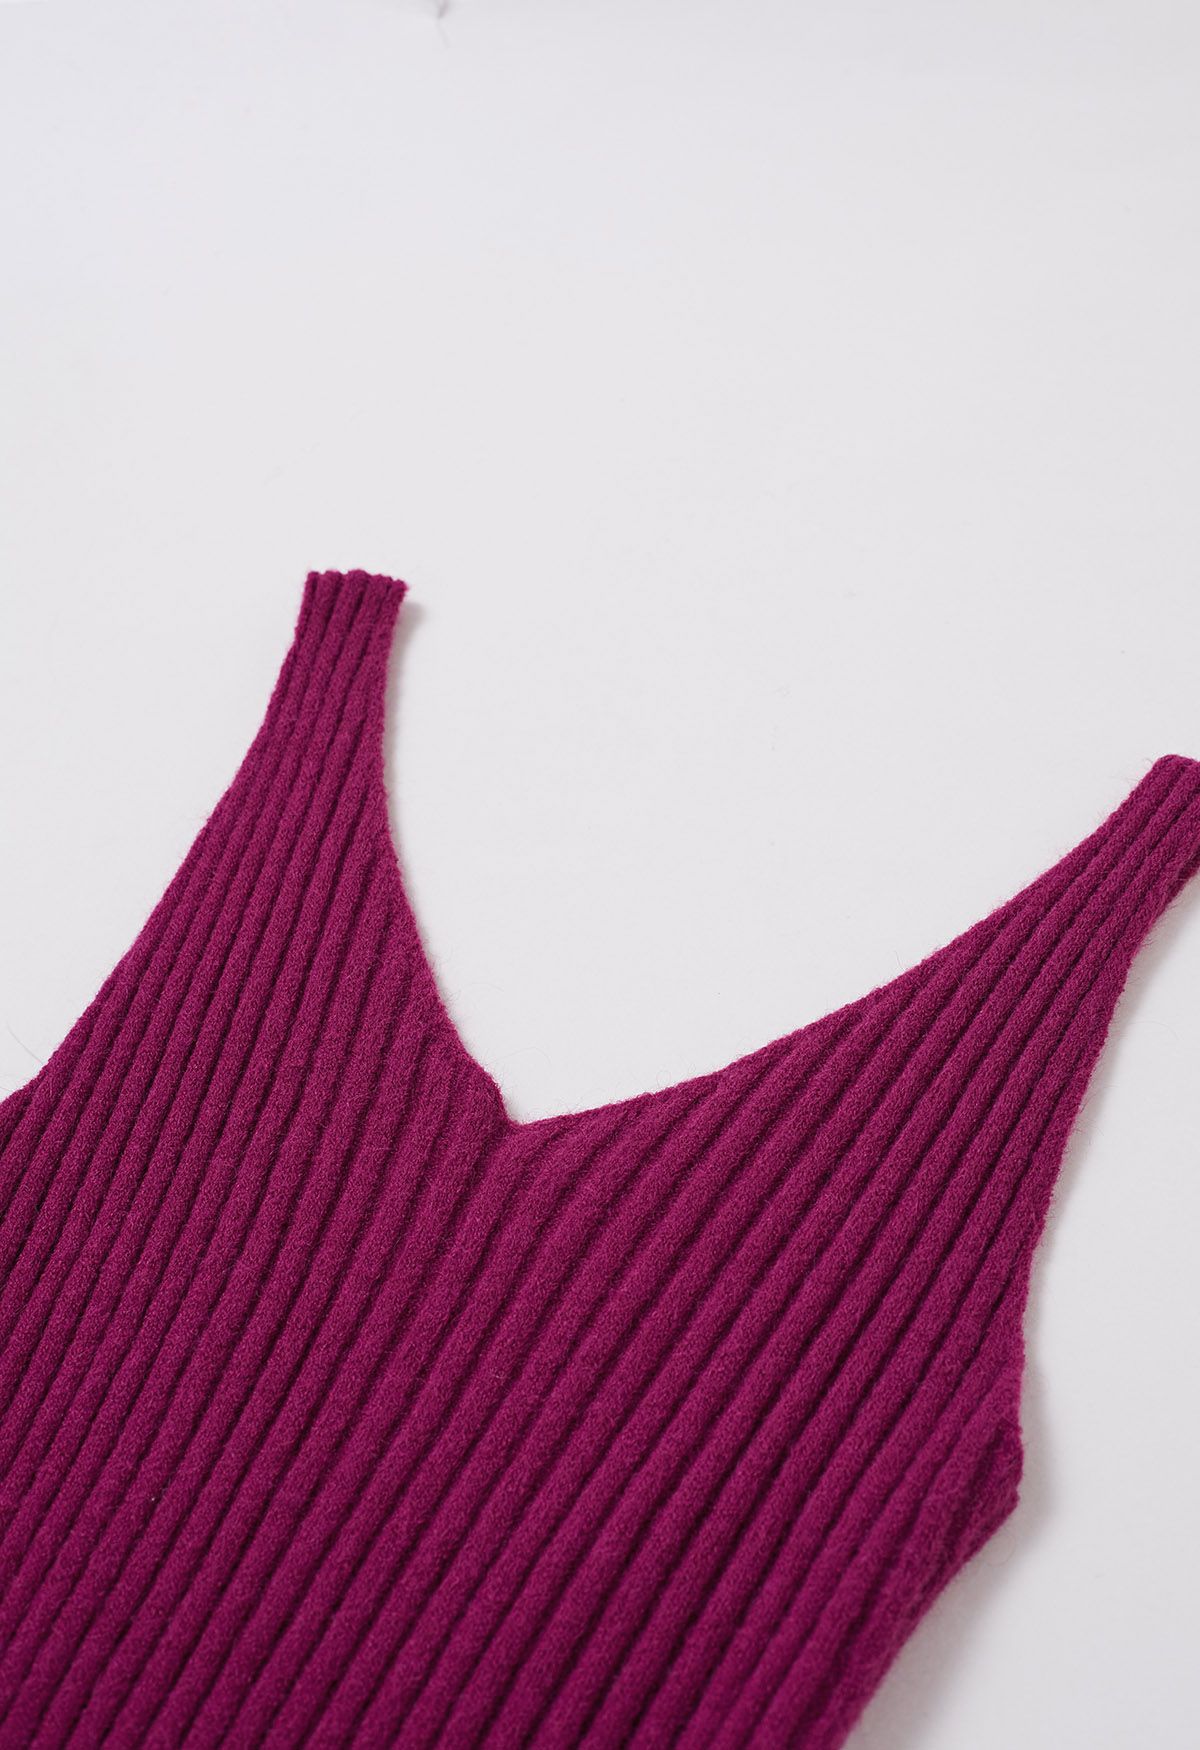 Pearl Neckline Ribbed Knit Twinset Dress in Magenta